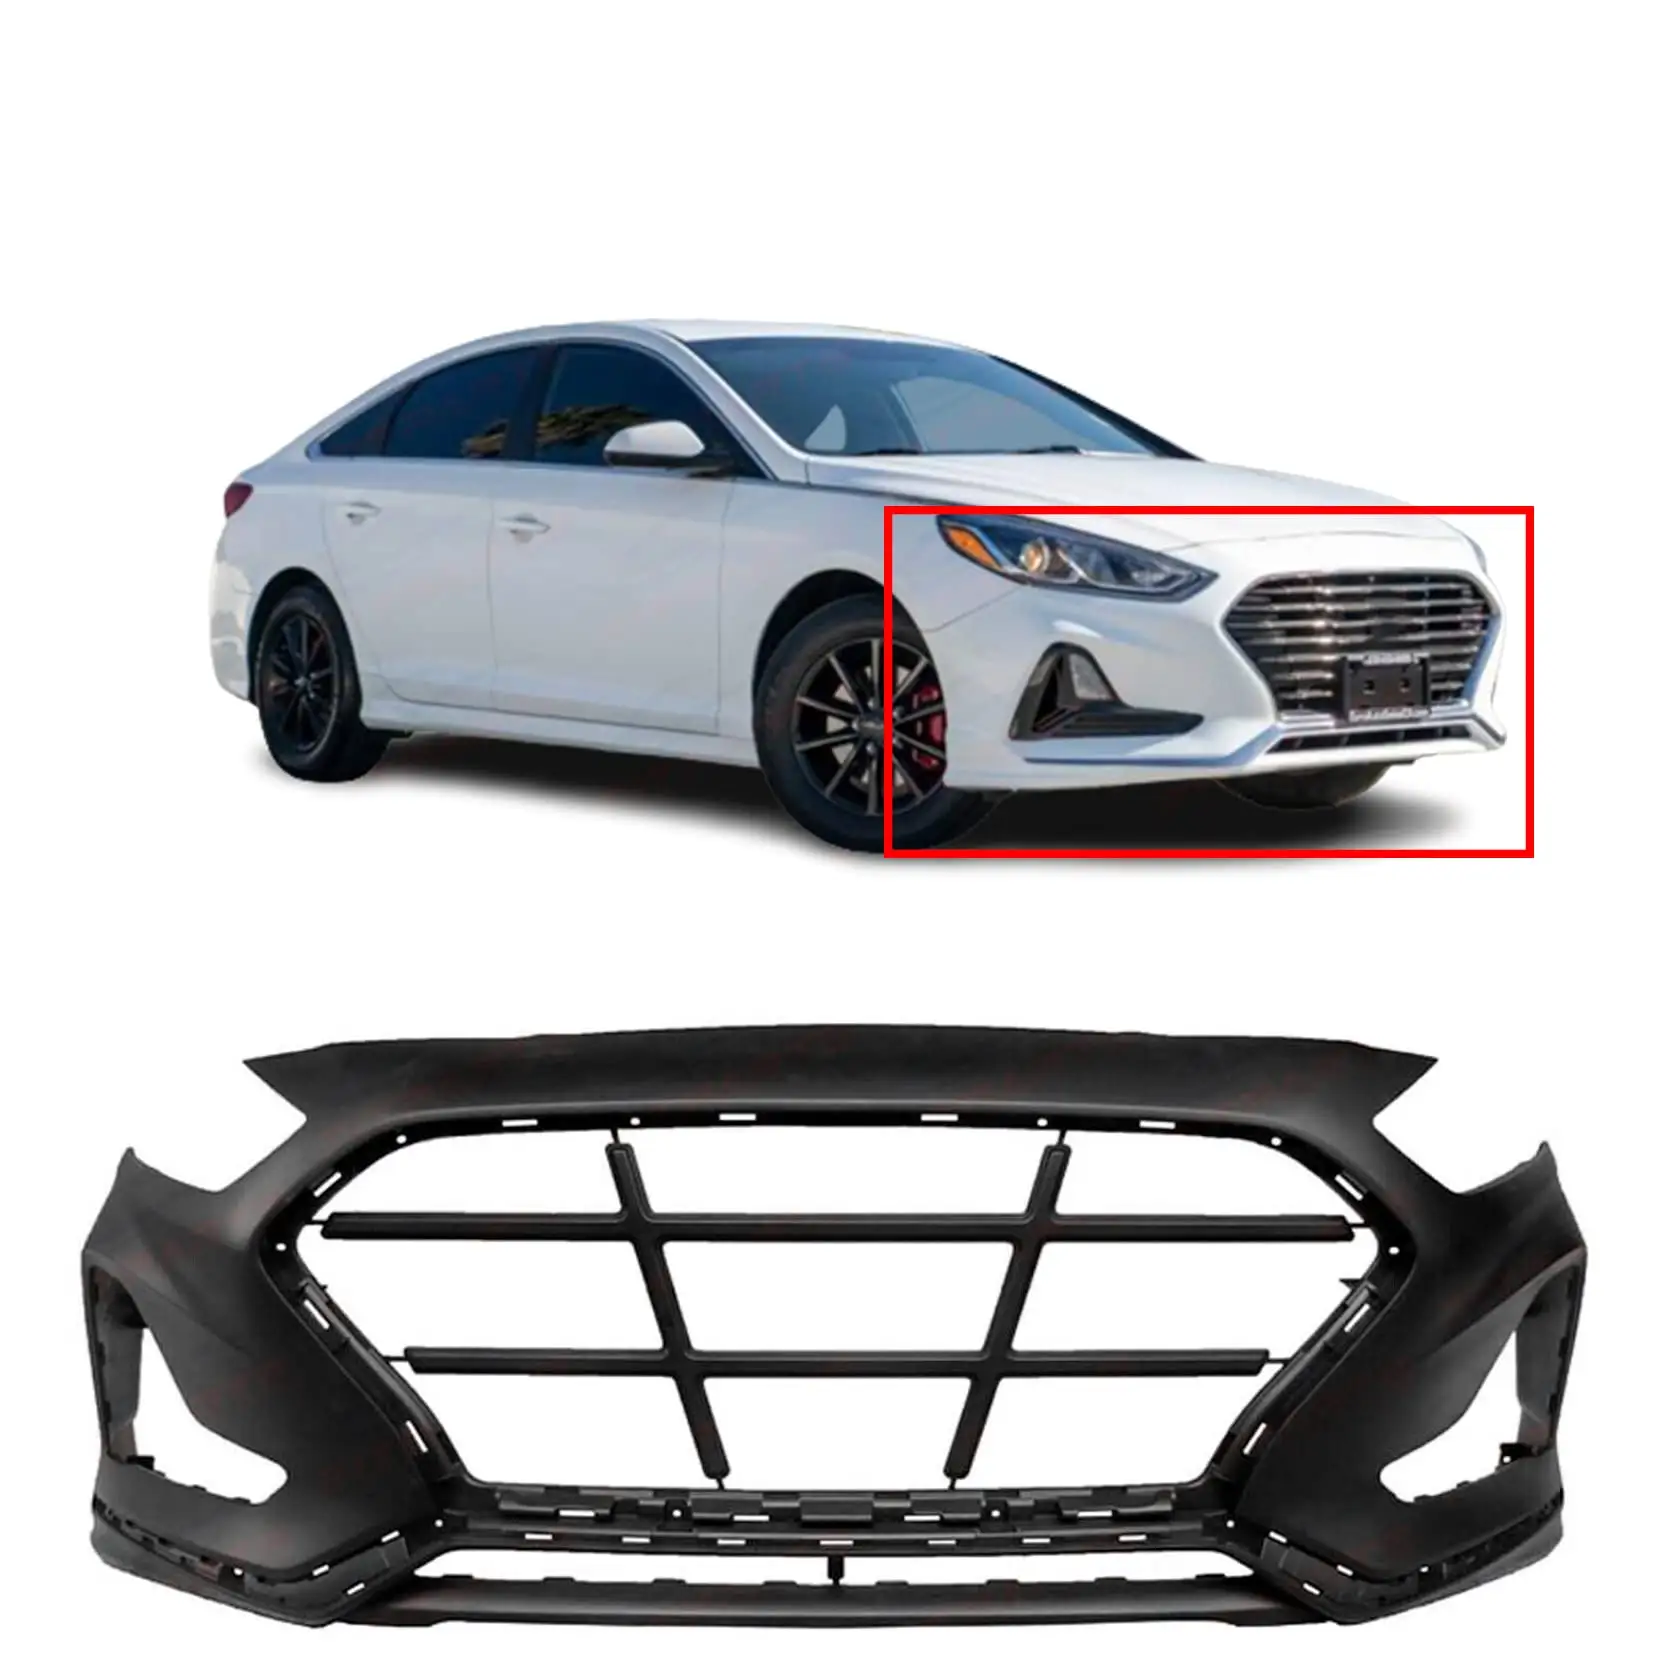 Compatible with Front Bumper Cover for 2018-2019 Hyundai Sonata Non-Turbo Essential Hybrid Limited Luxury SEL SE 2.4 GLS GL